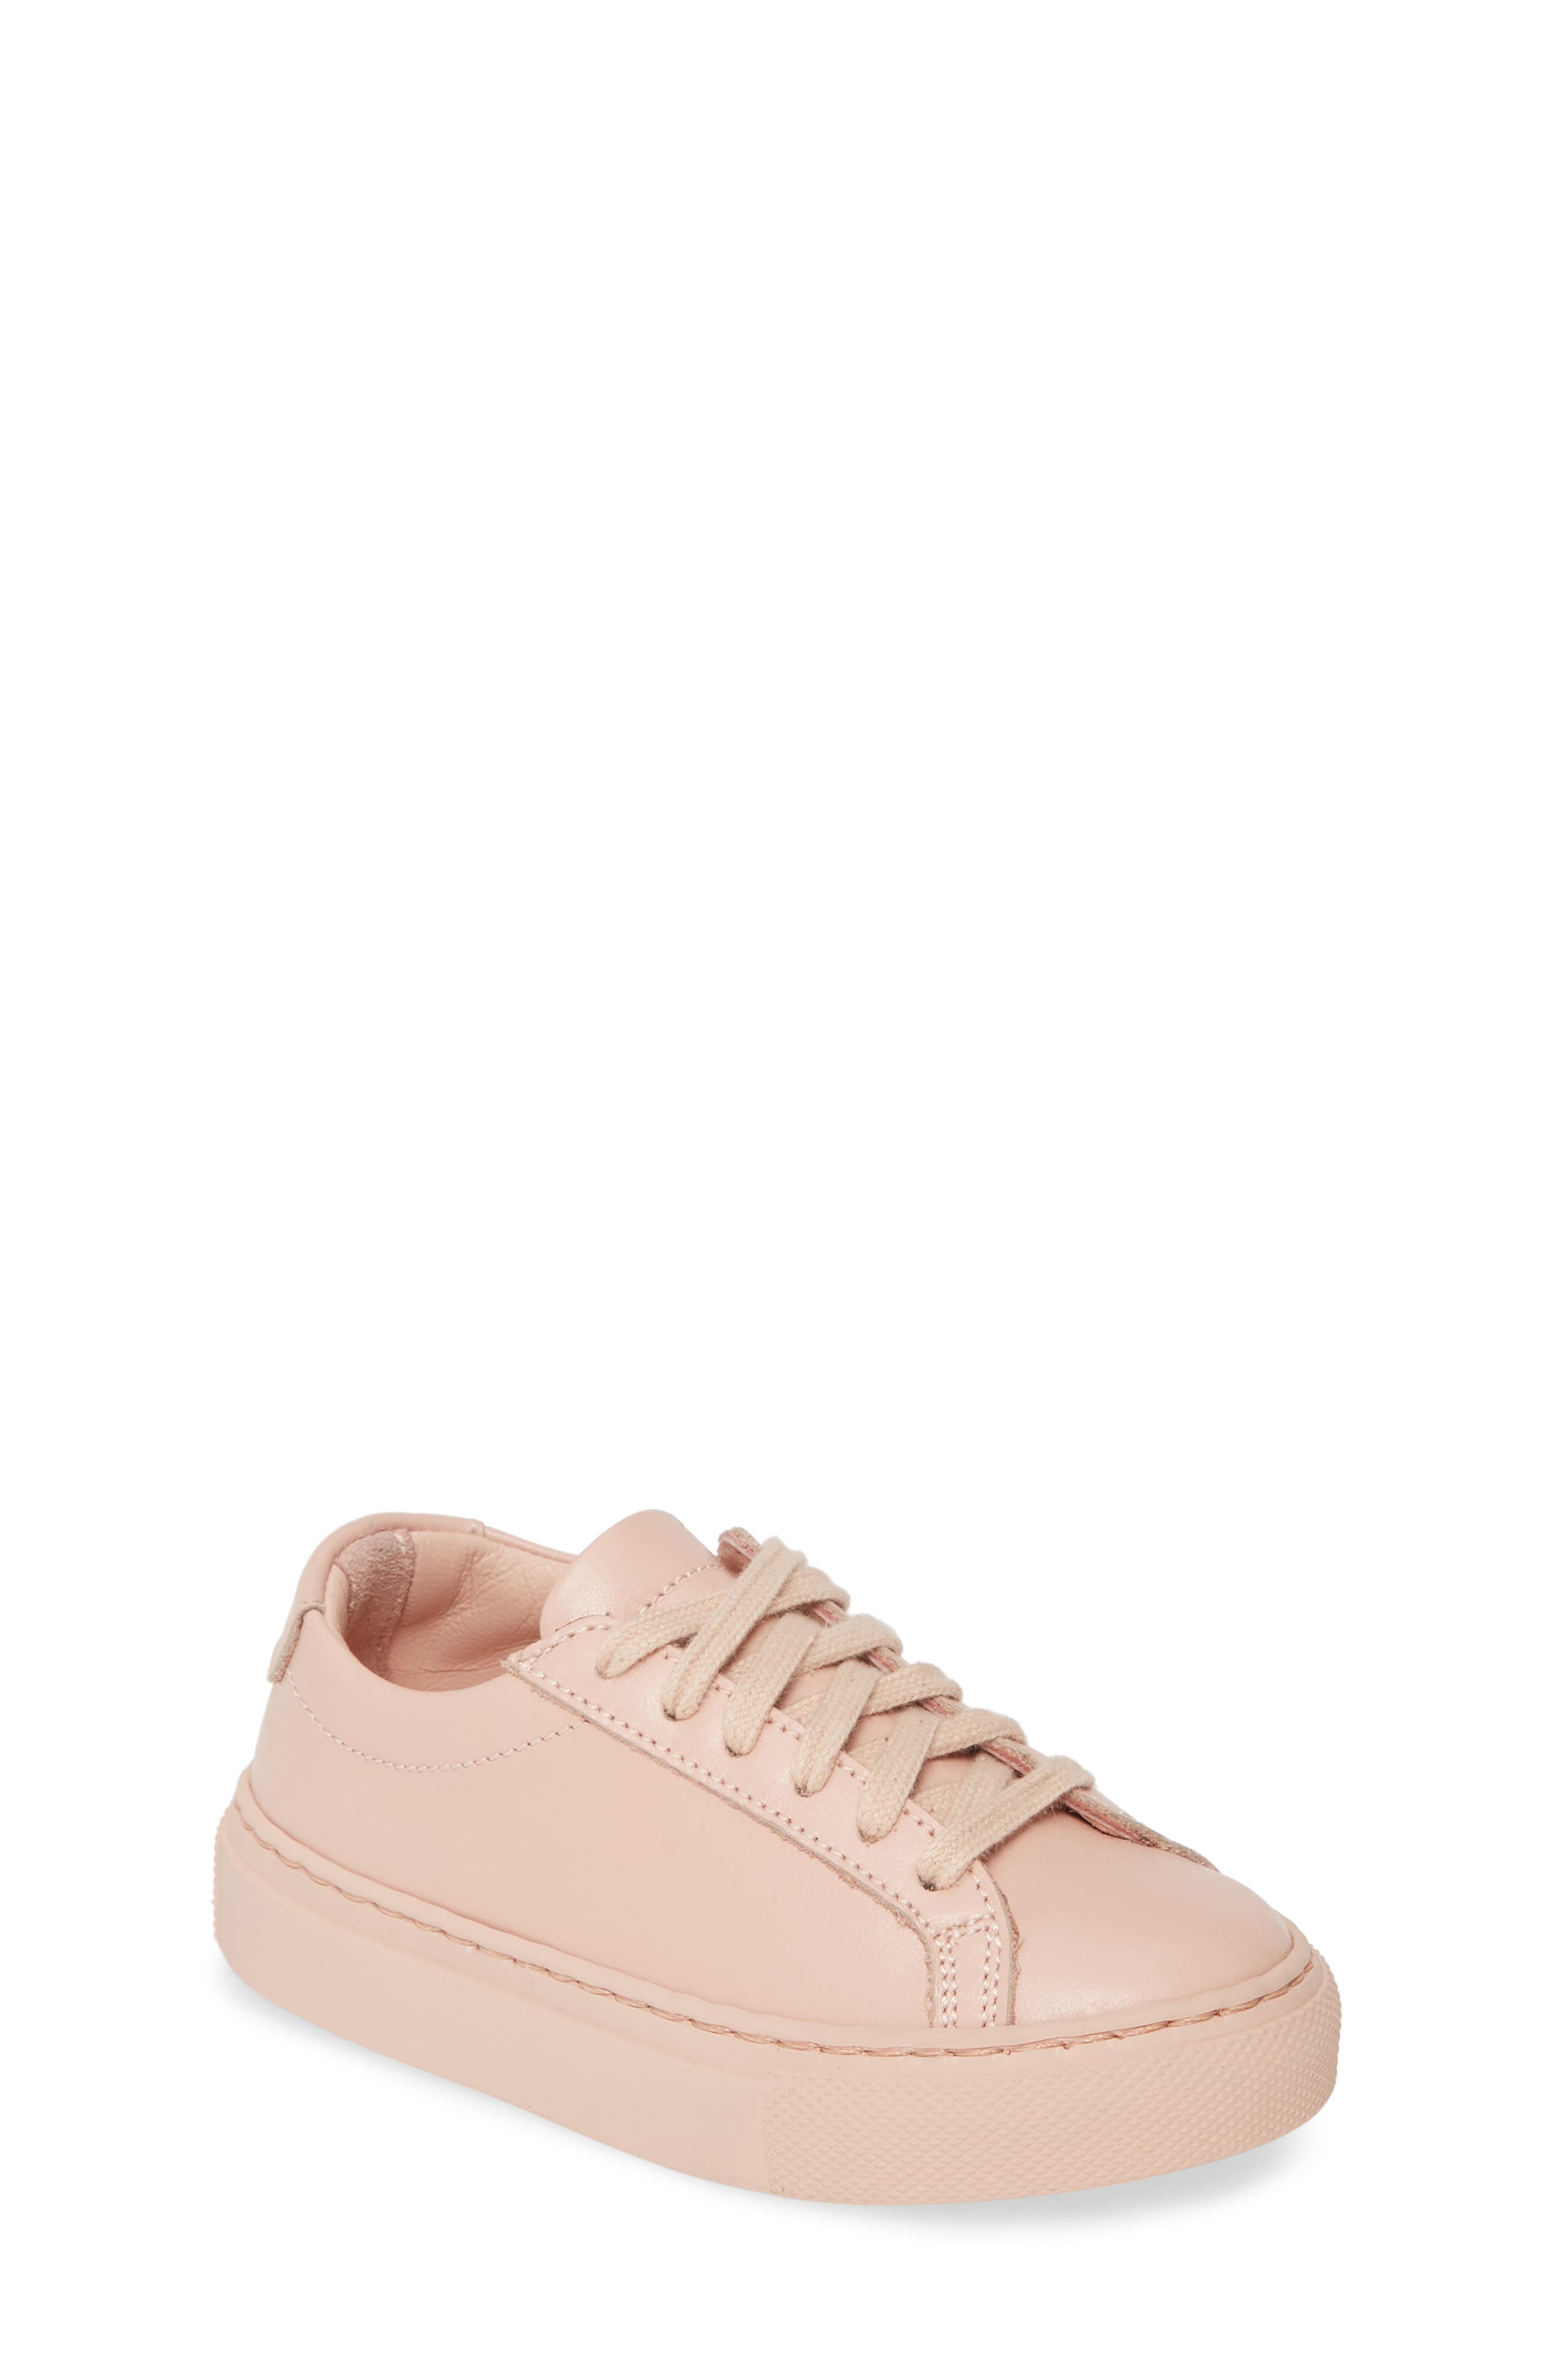 Common Projects Designer Collections 